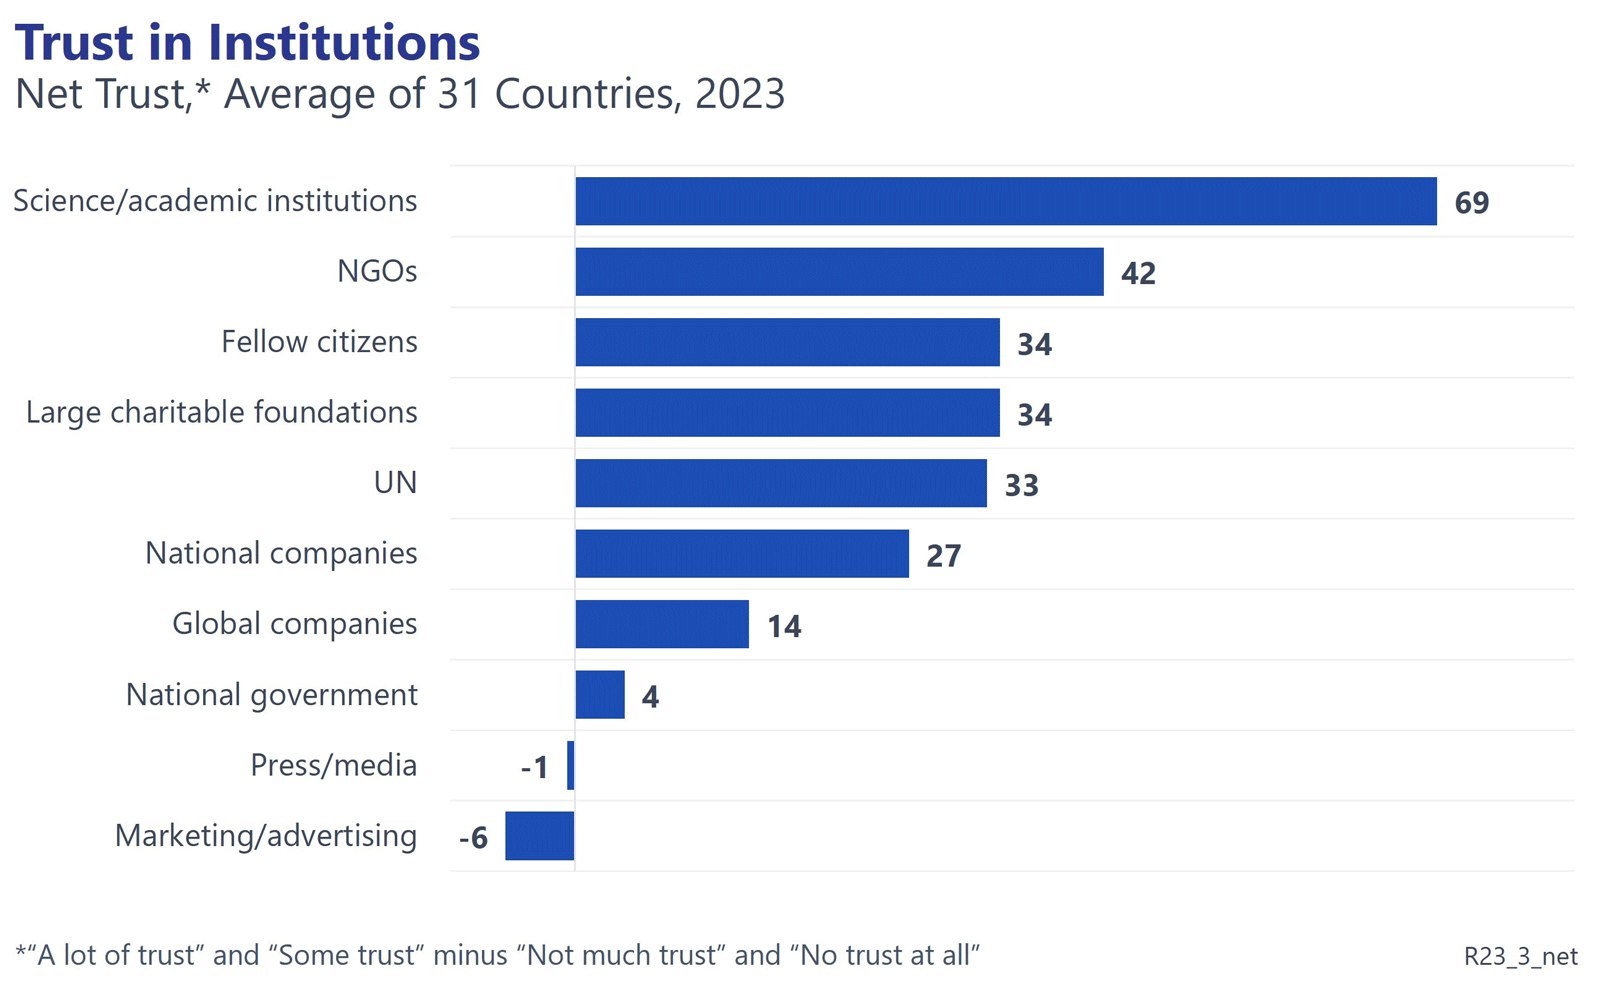 Bar chart showing Net Trust in institutions, average of 31 Countries, 2023